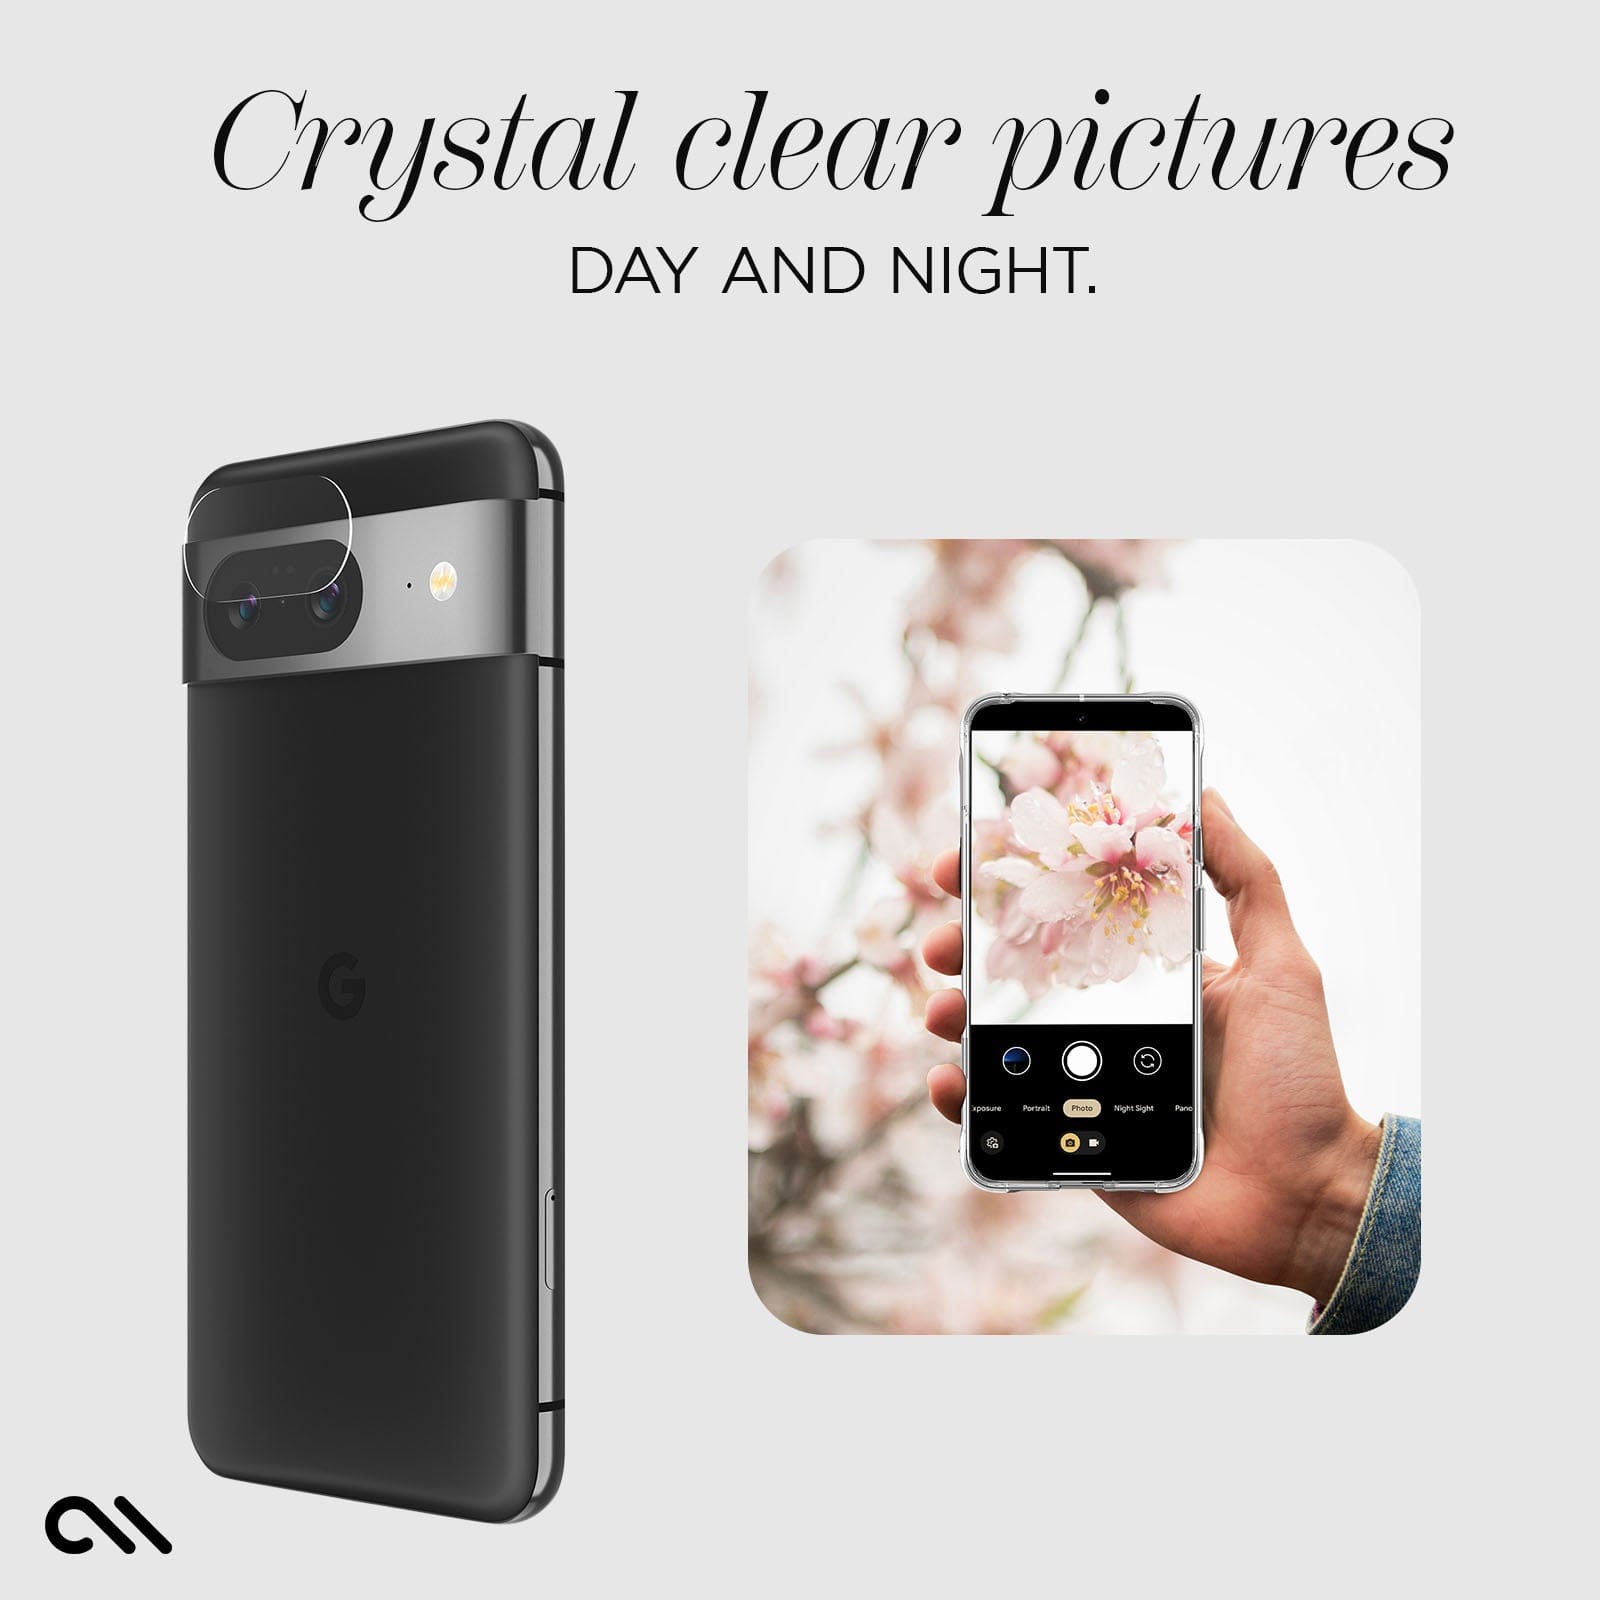 CRYSTAL CLEAR PICTURES DAY AND NIGHT